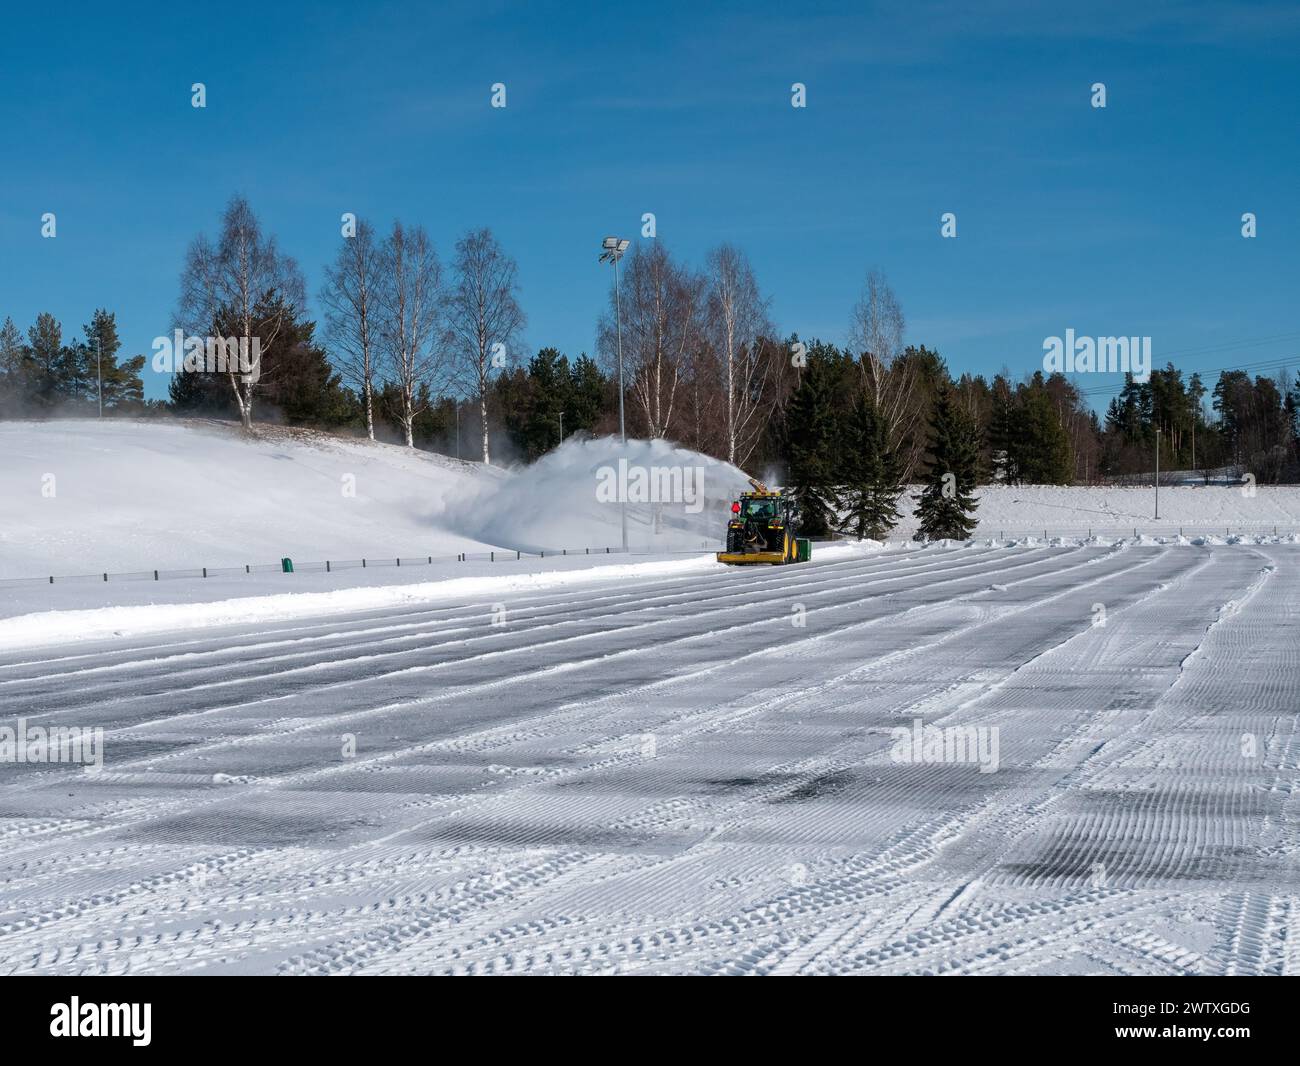 Tractor with snowblower blowing snow on a sports area, Kempele Finland Stock Photo